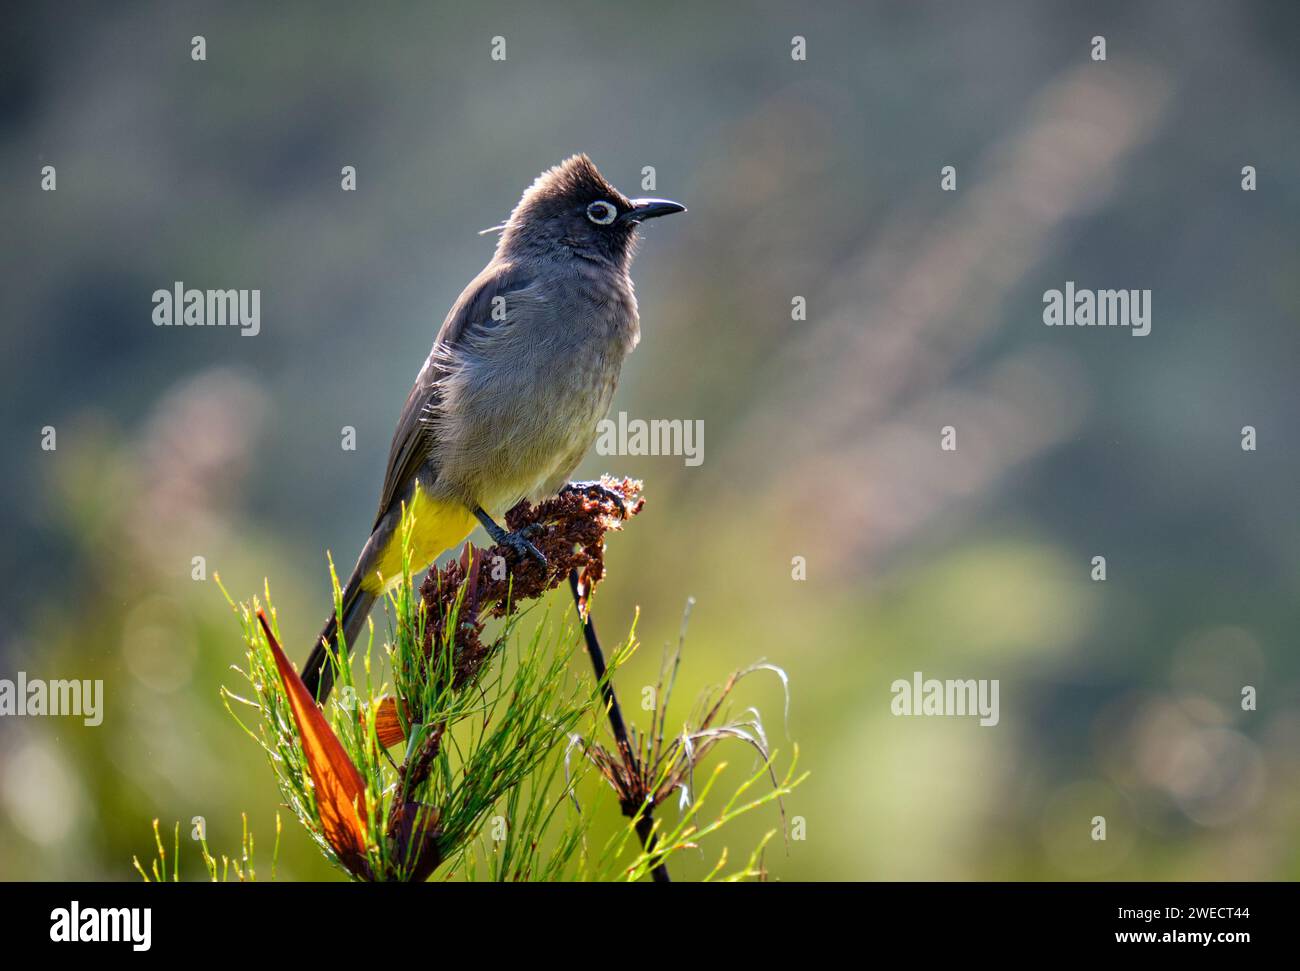 South african Cape Bulbul standing on top of dried bush. Sideway view with blurred background Stock Photo